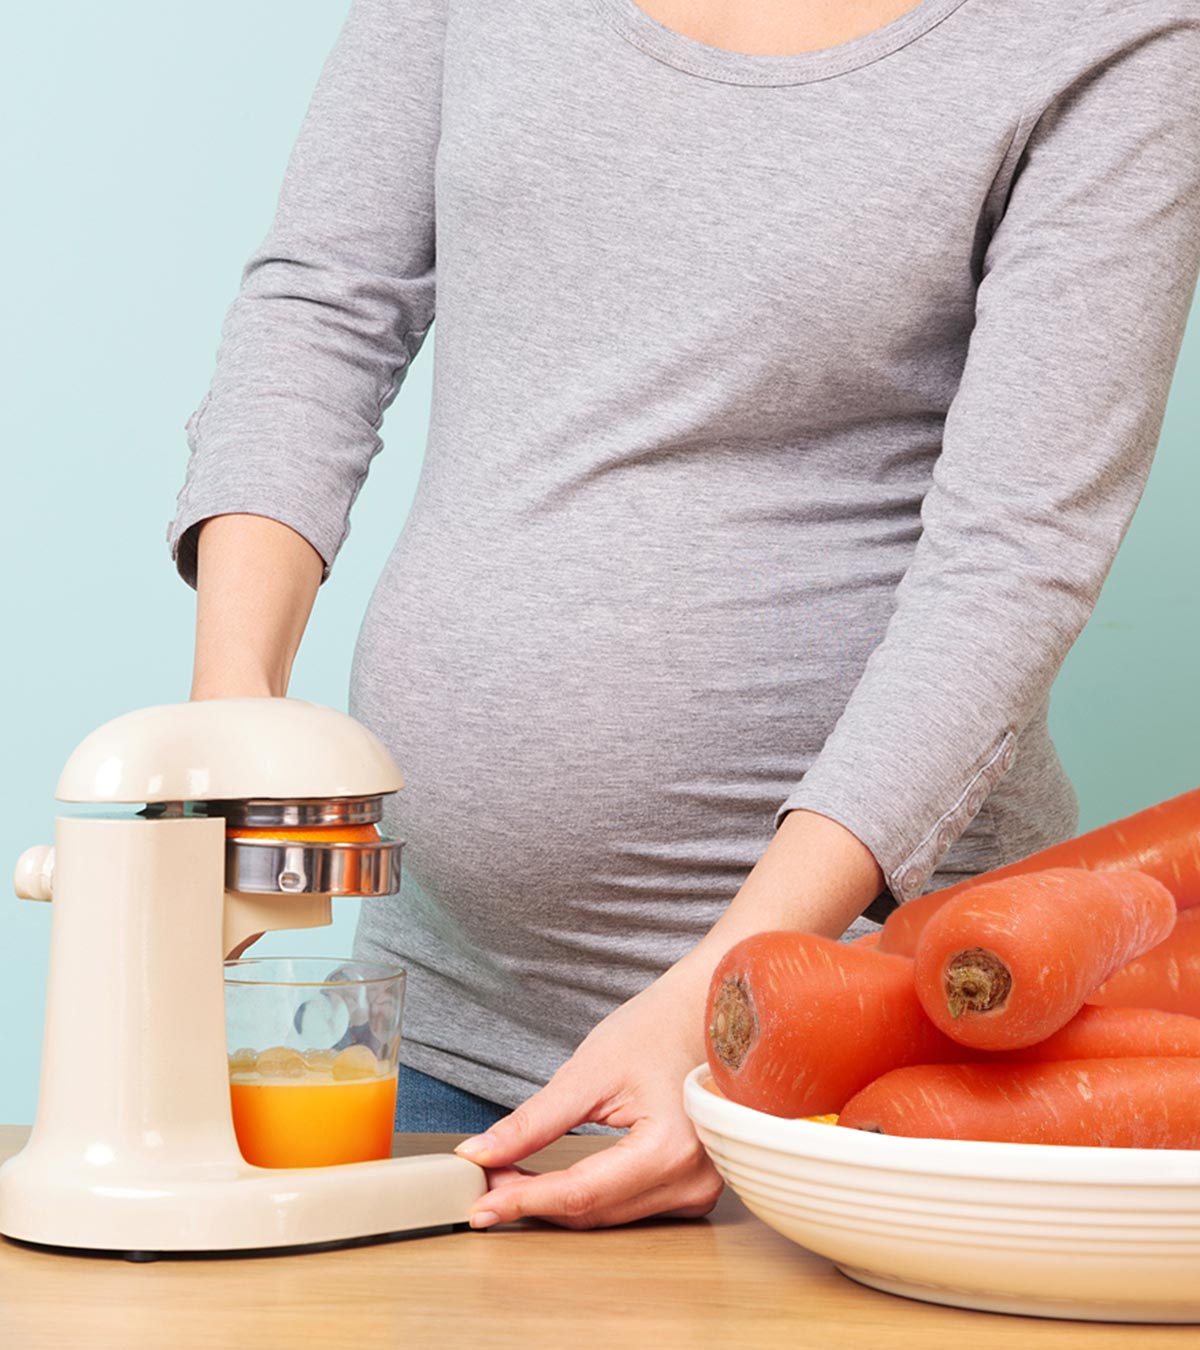 12 amazing benefits of carrot juice during pregnancy